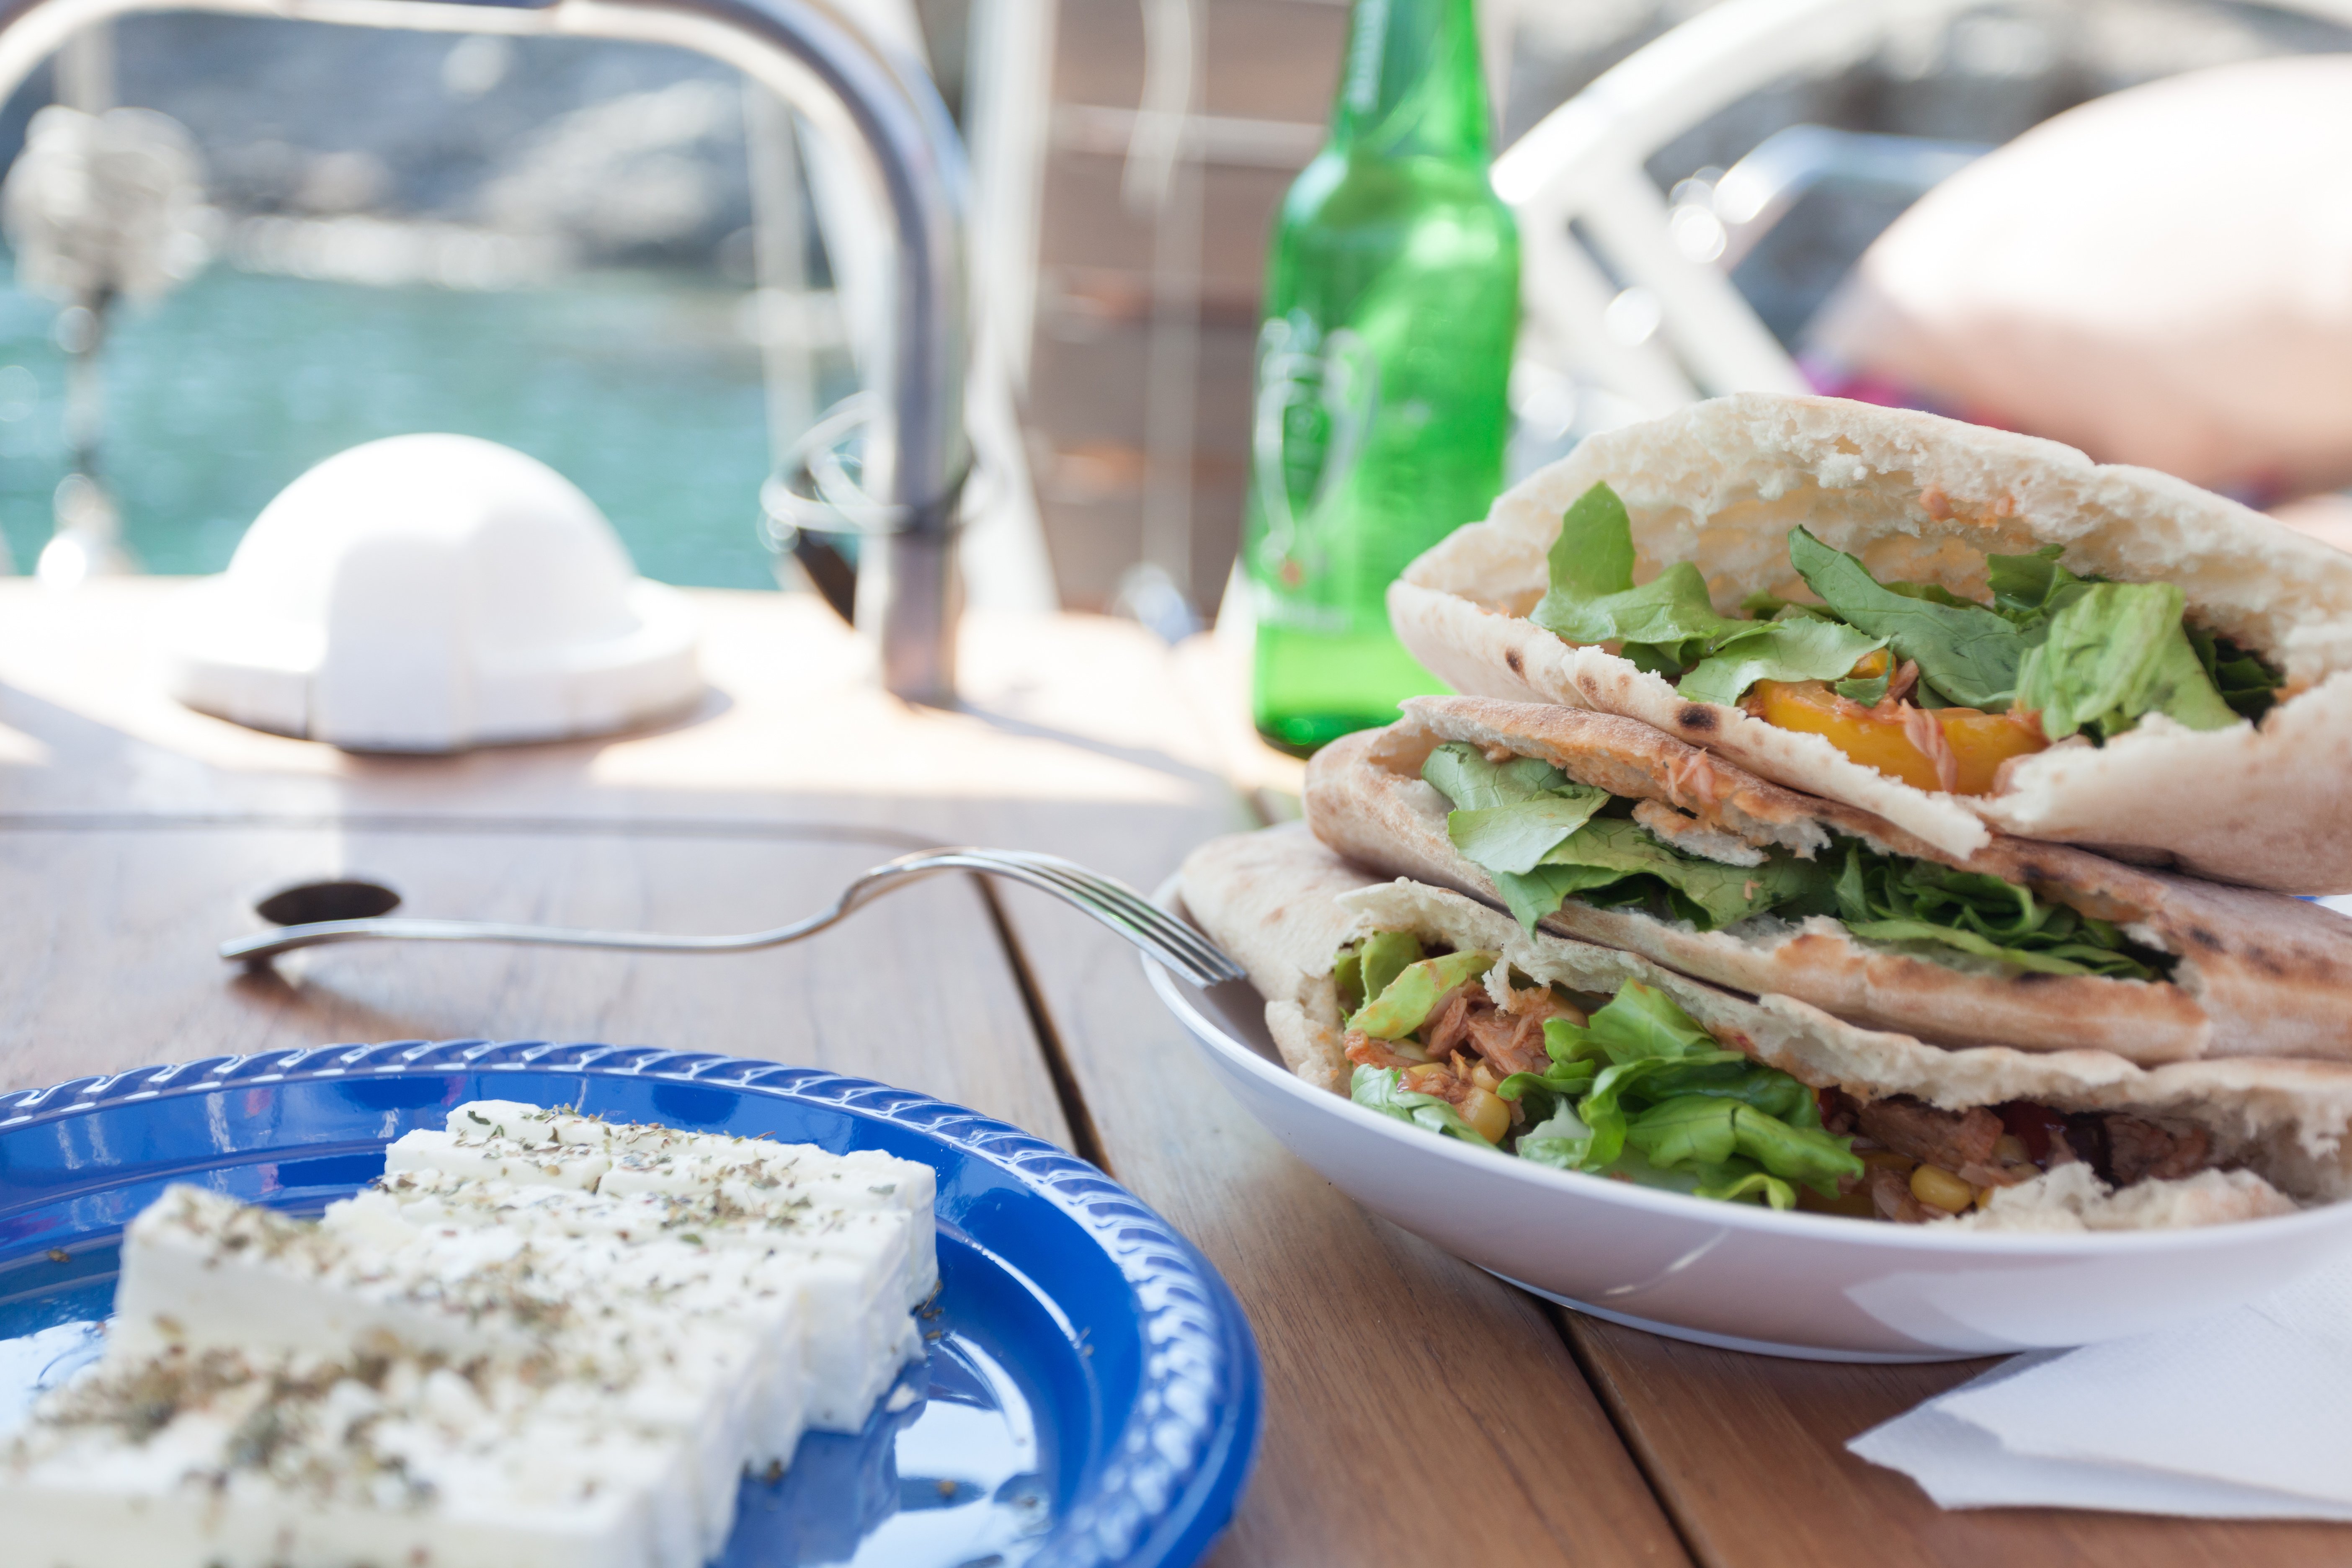 Yacht catering | light lunch of pita sandwiches